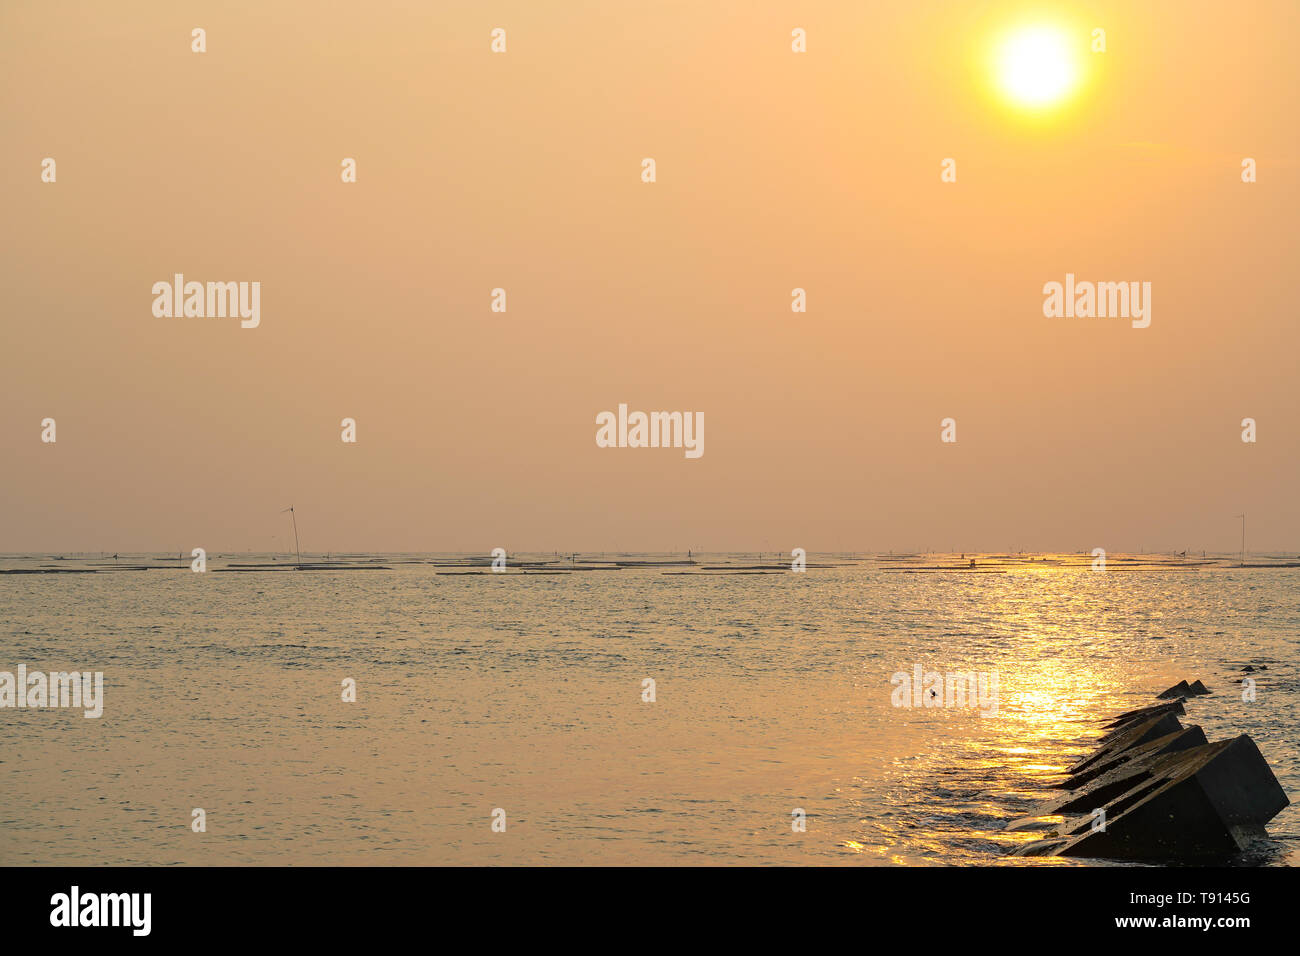 Seascape at Yellow glowing sun setting in the horizon with breakwater. Stock Photo